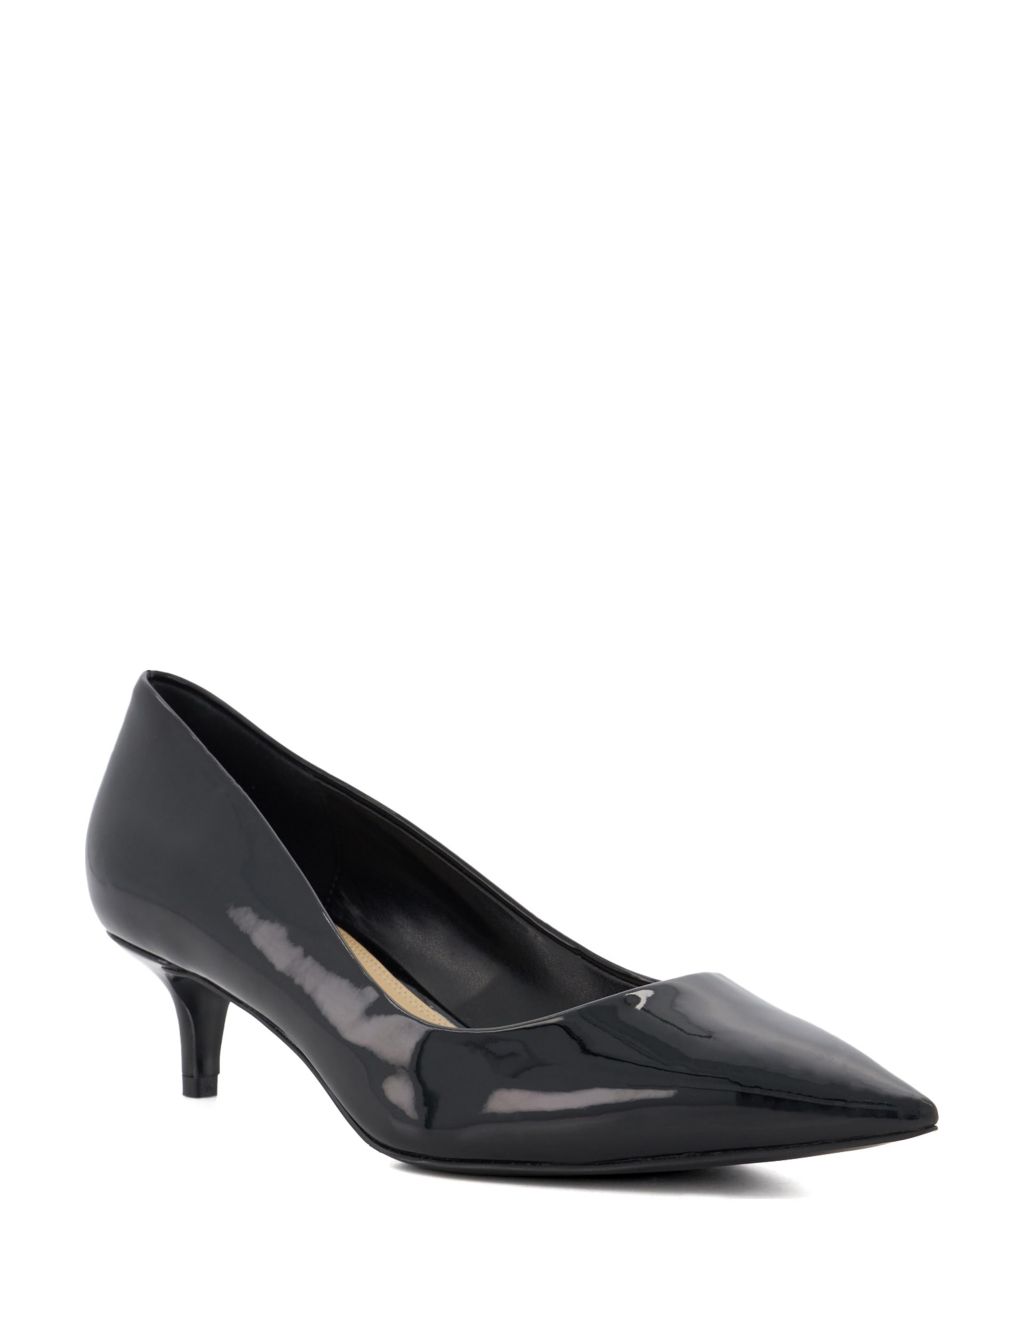 Patent Kitten Heel Pointed Court Shoes image 2